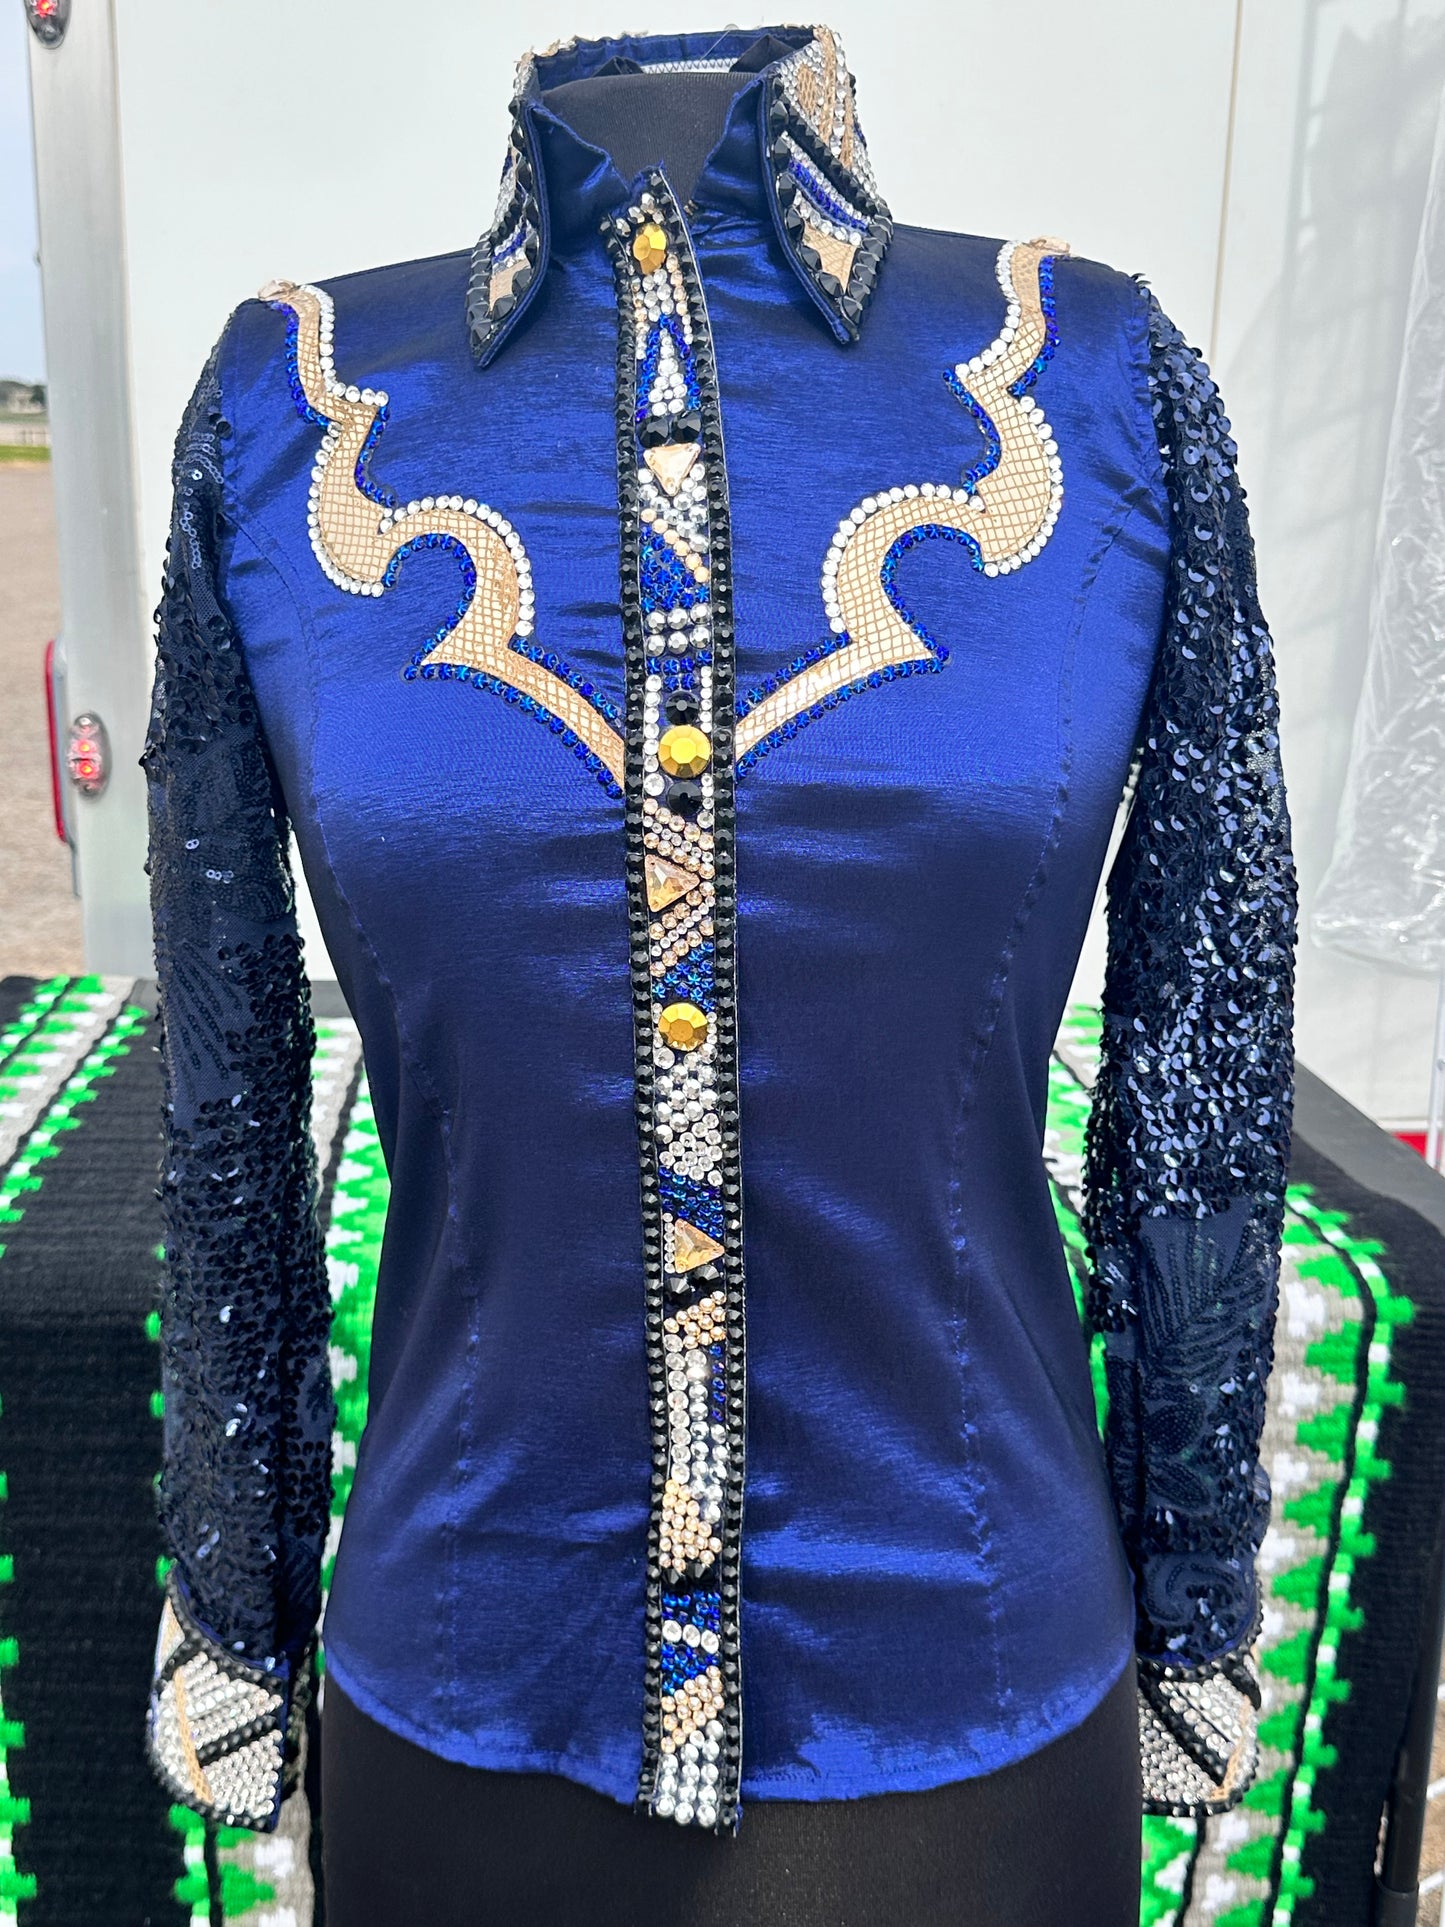 XS day shirt stretch taffeta navy with gold accents sequin sleeves